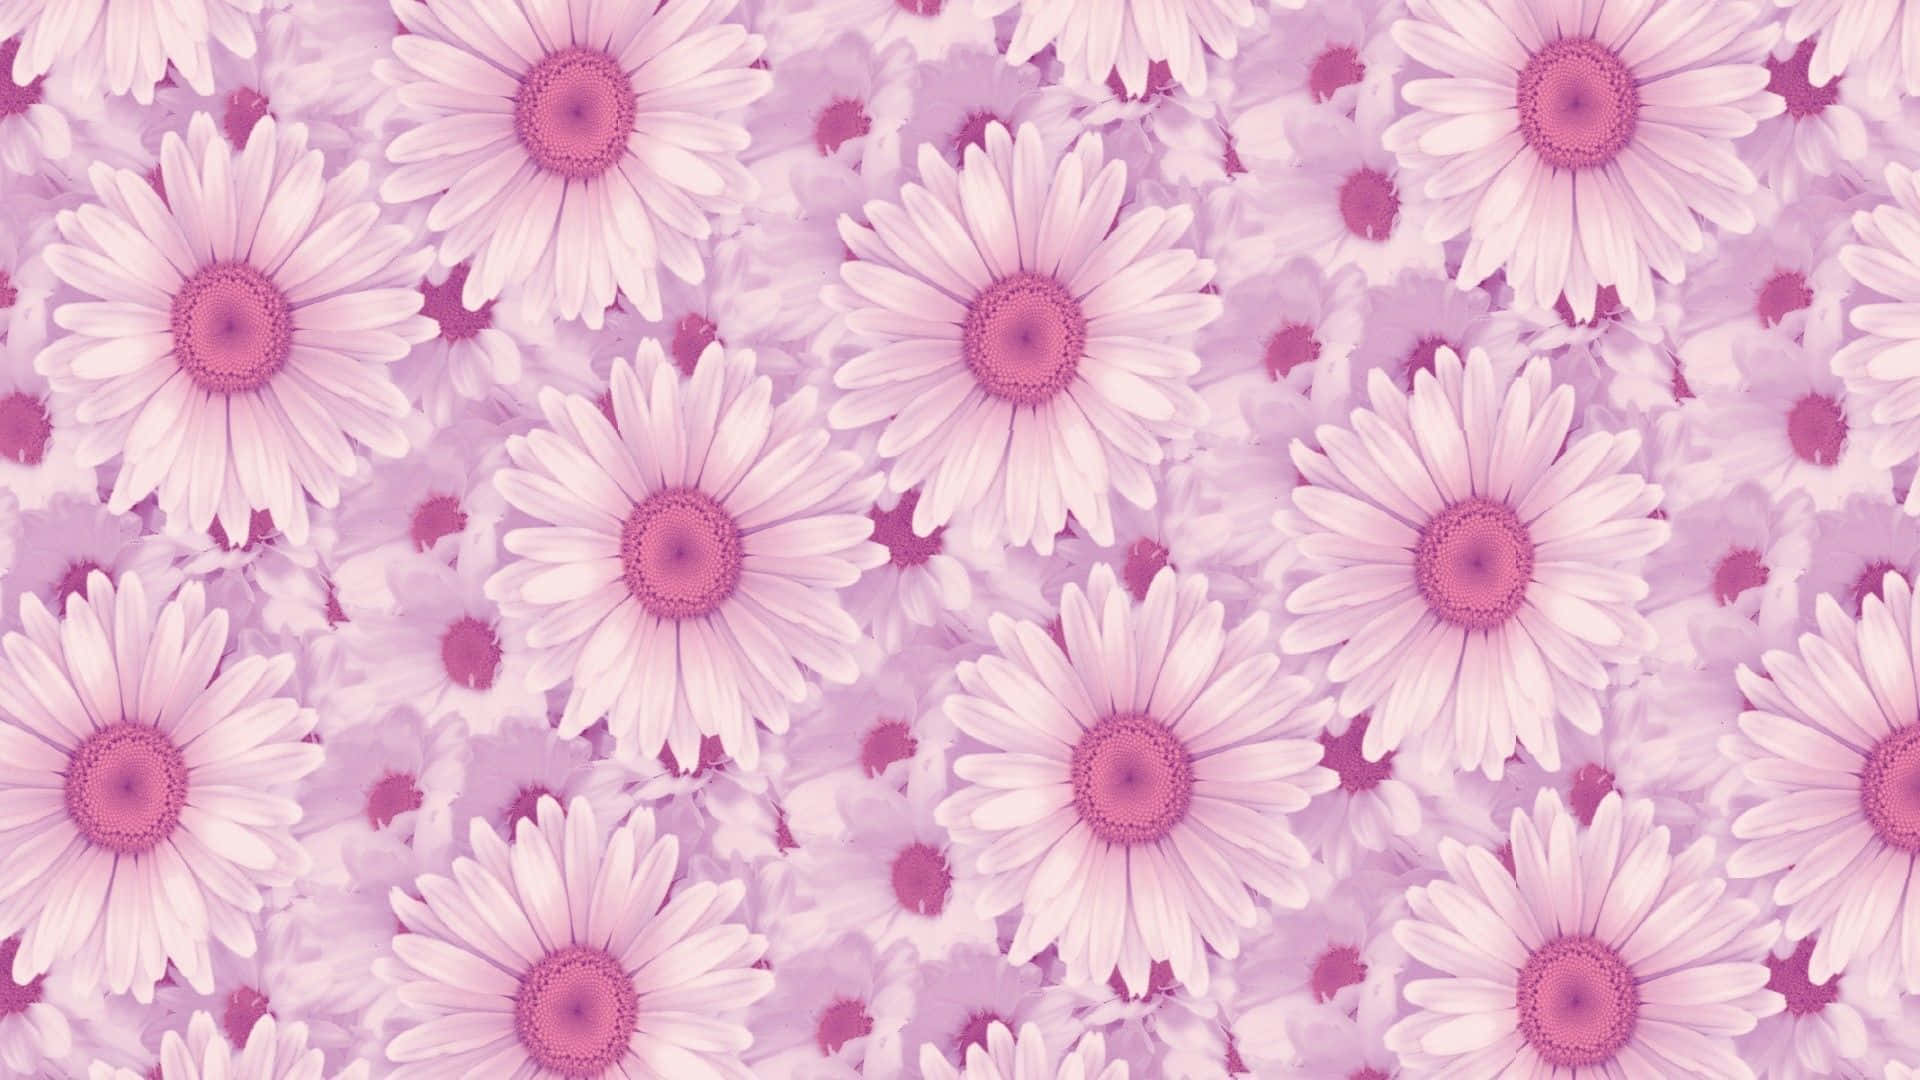 Pink Flowers Aesthetic Tumblr Background